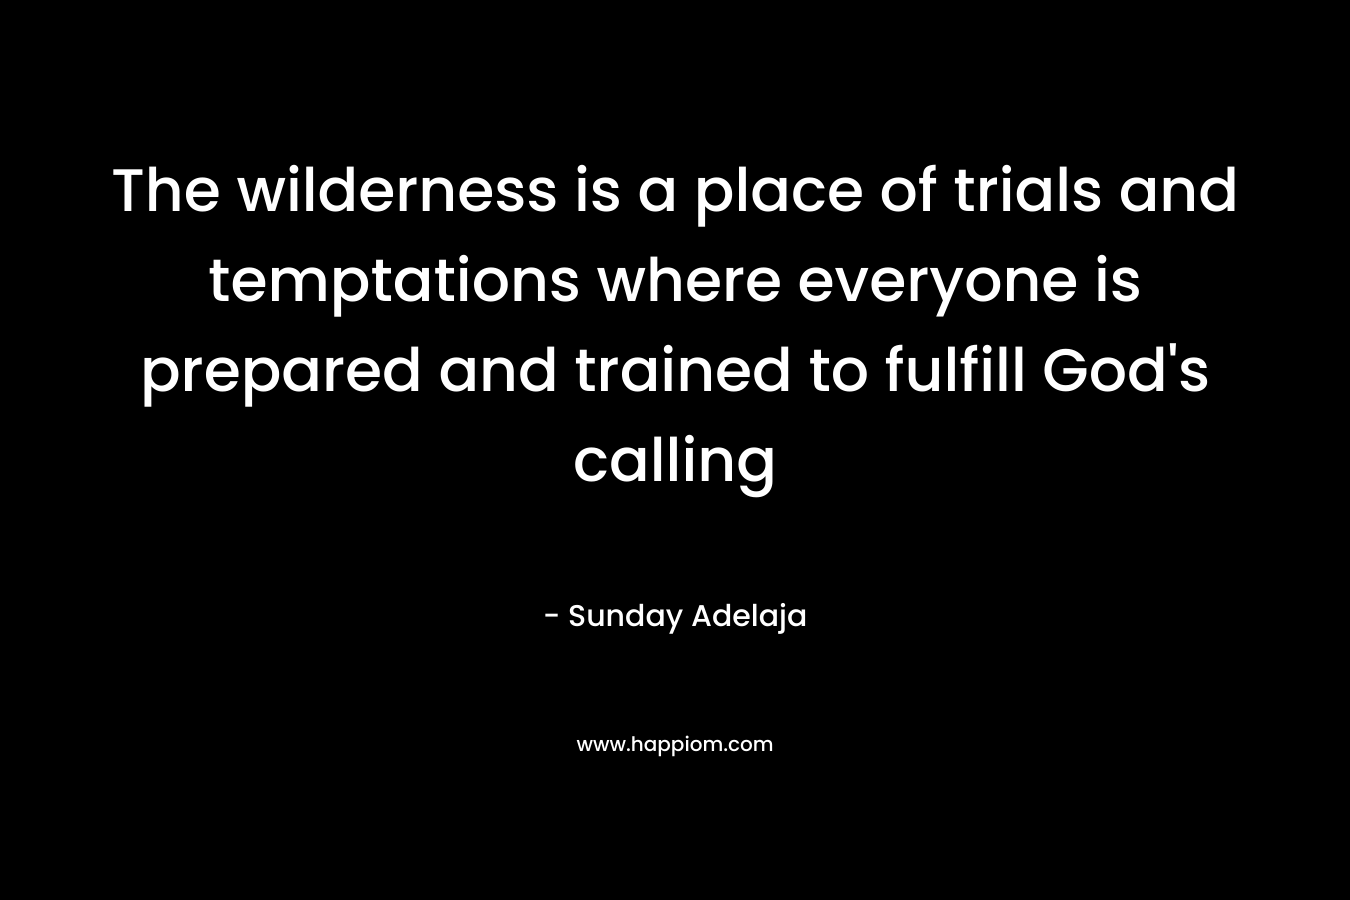 The wilderness is a place of trials and temptations where everyone is prepared and trained to fulfill God's calling